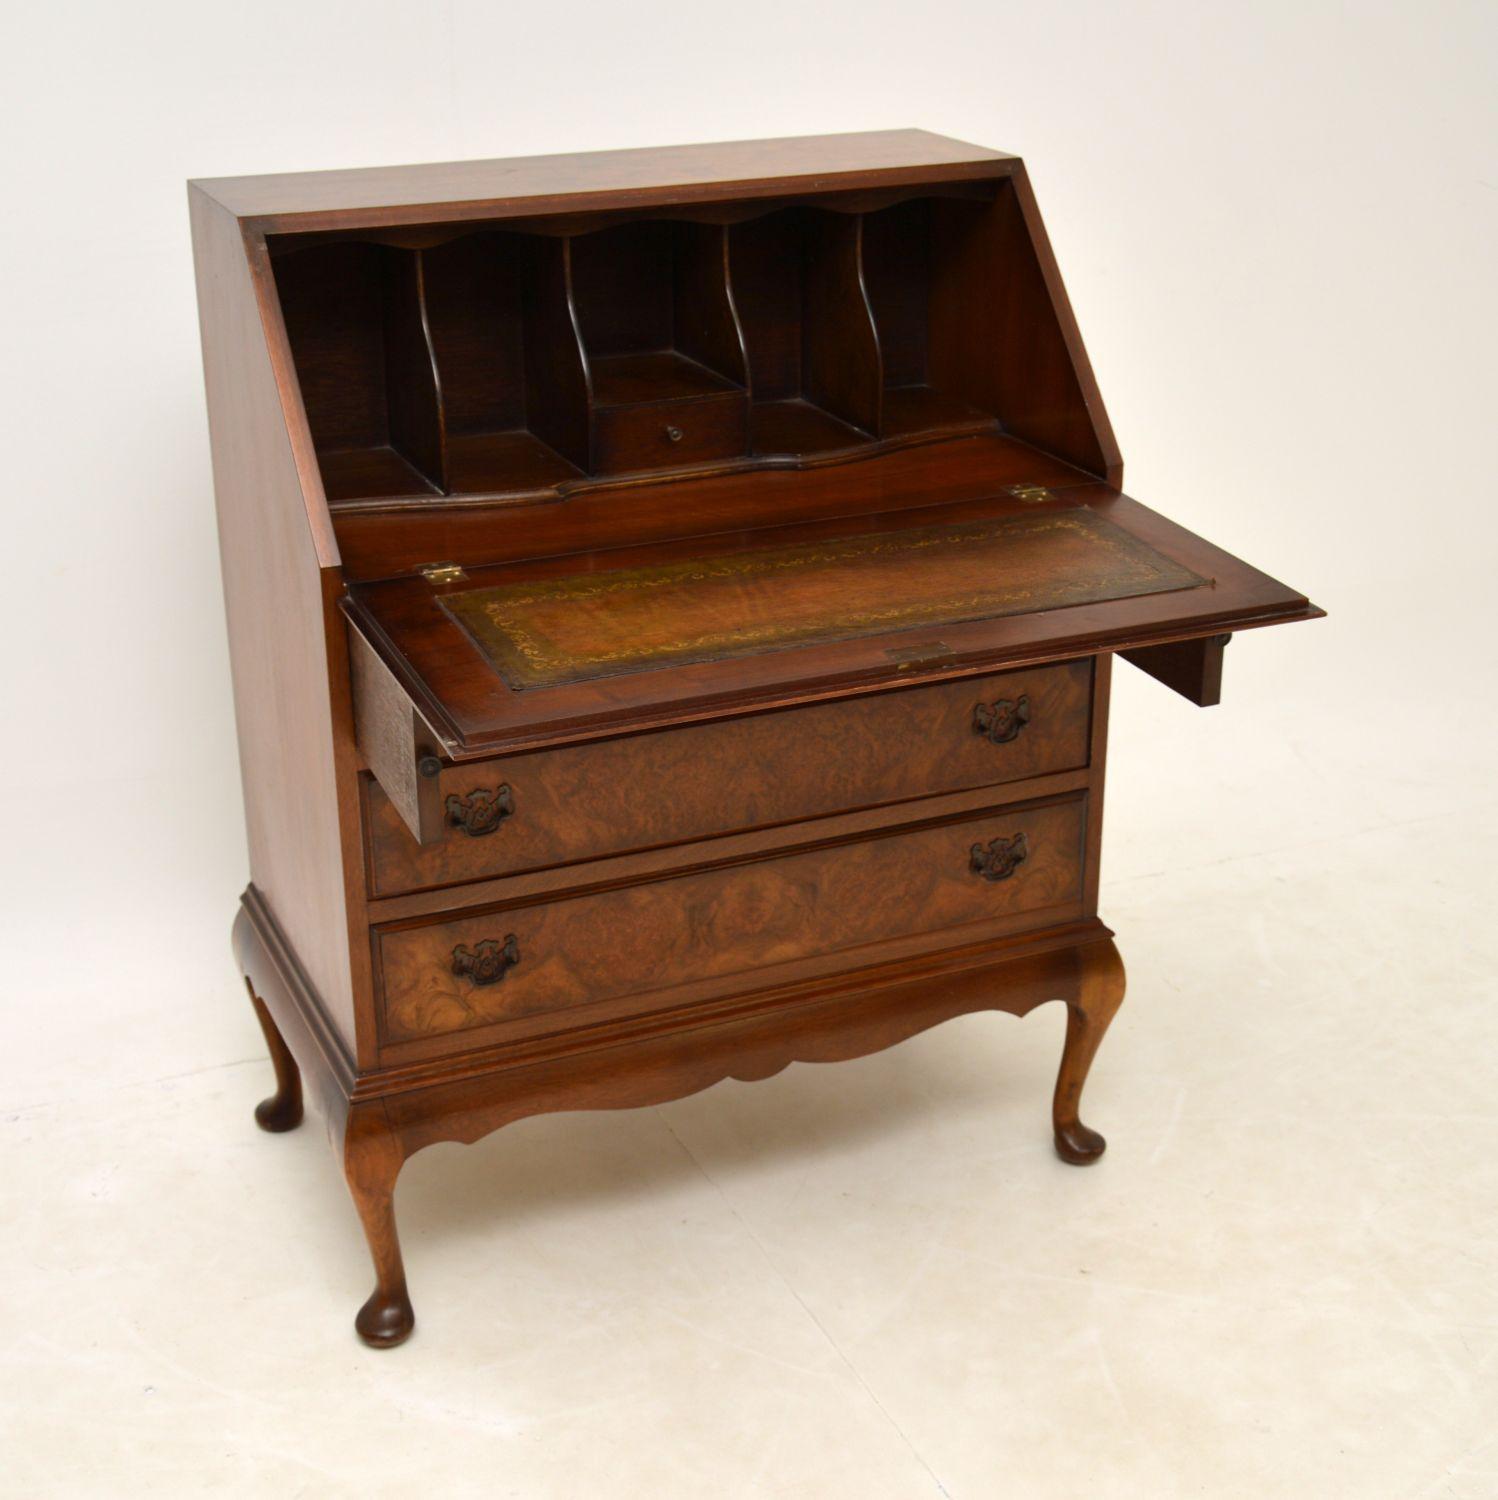 A smart and useful antique writing bureau in burr walnut. This was made in England, it dates from around the 1930s-1950s period.
It’s well made and a very practical item, offering a compact leather top work space and lots of storage space. This has